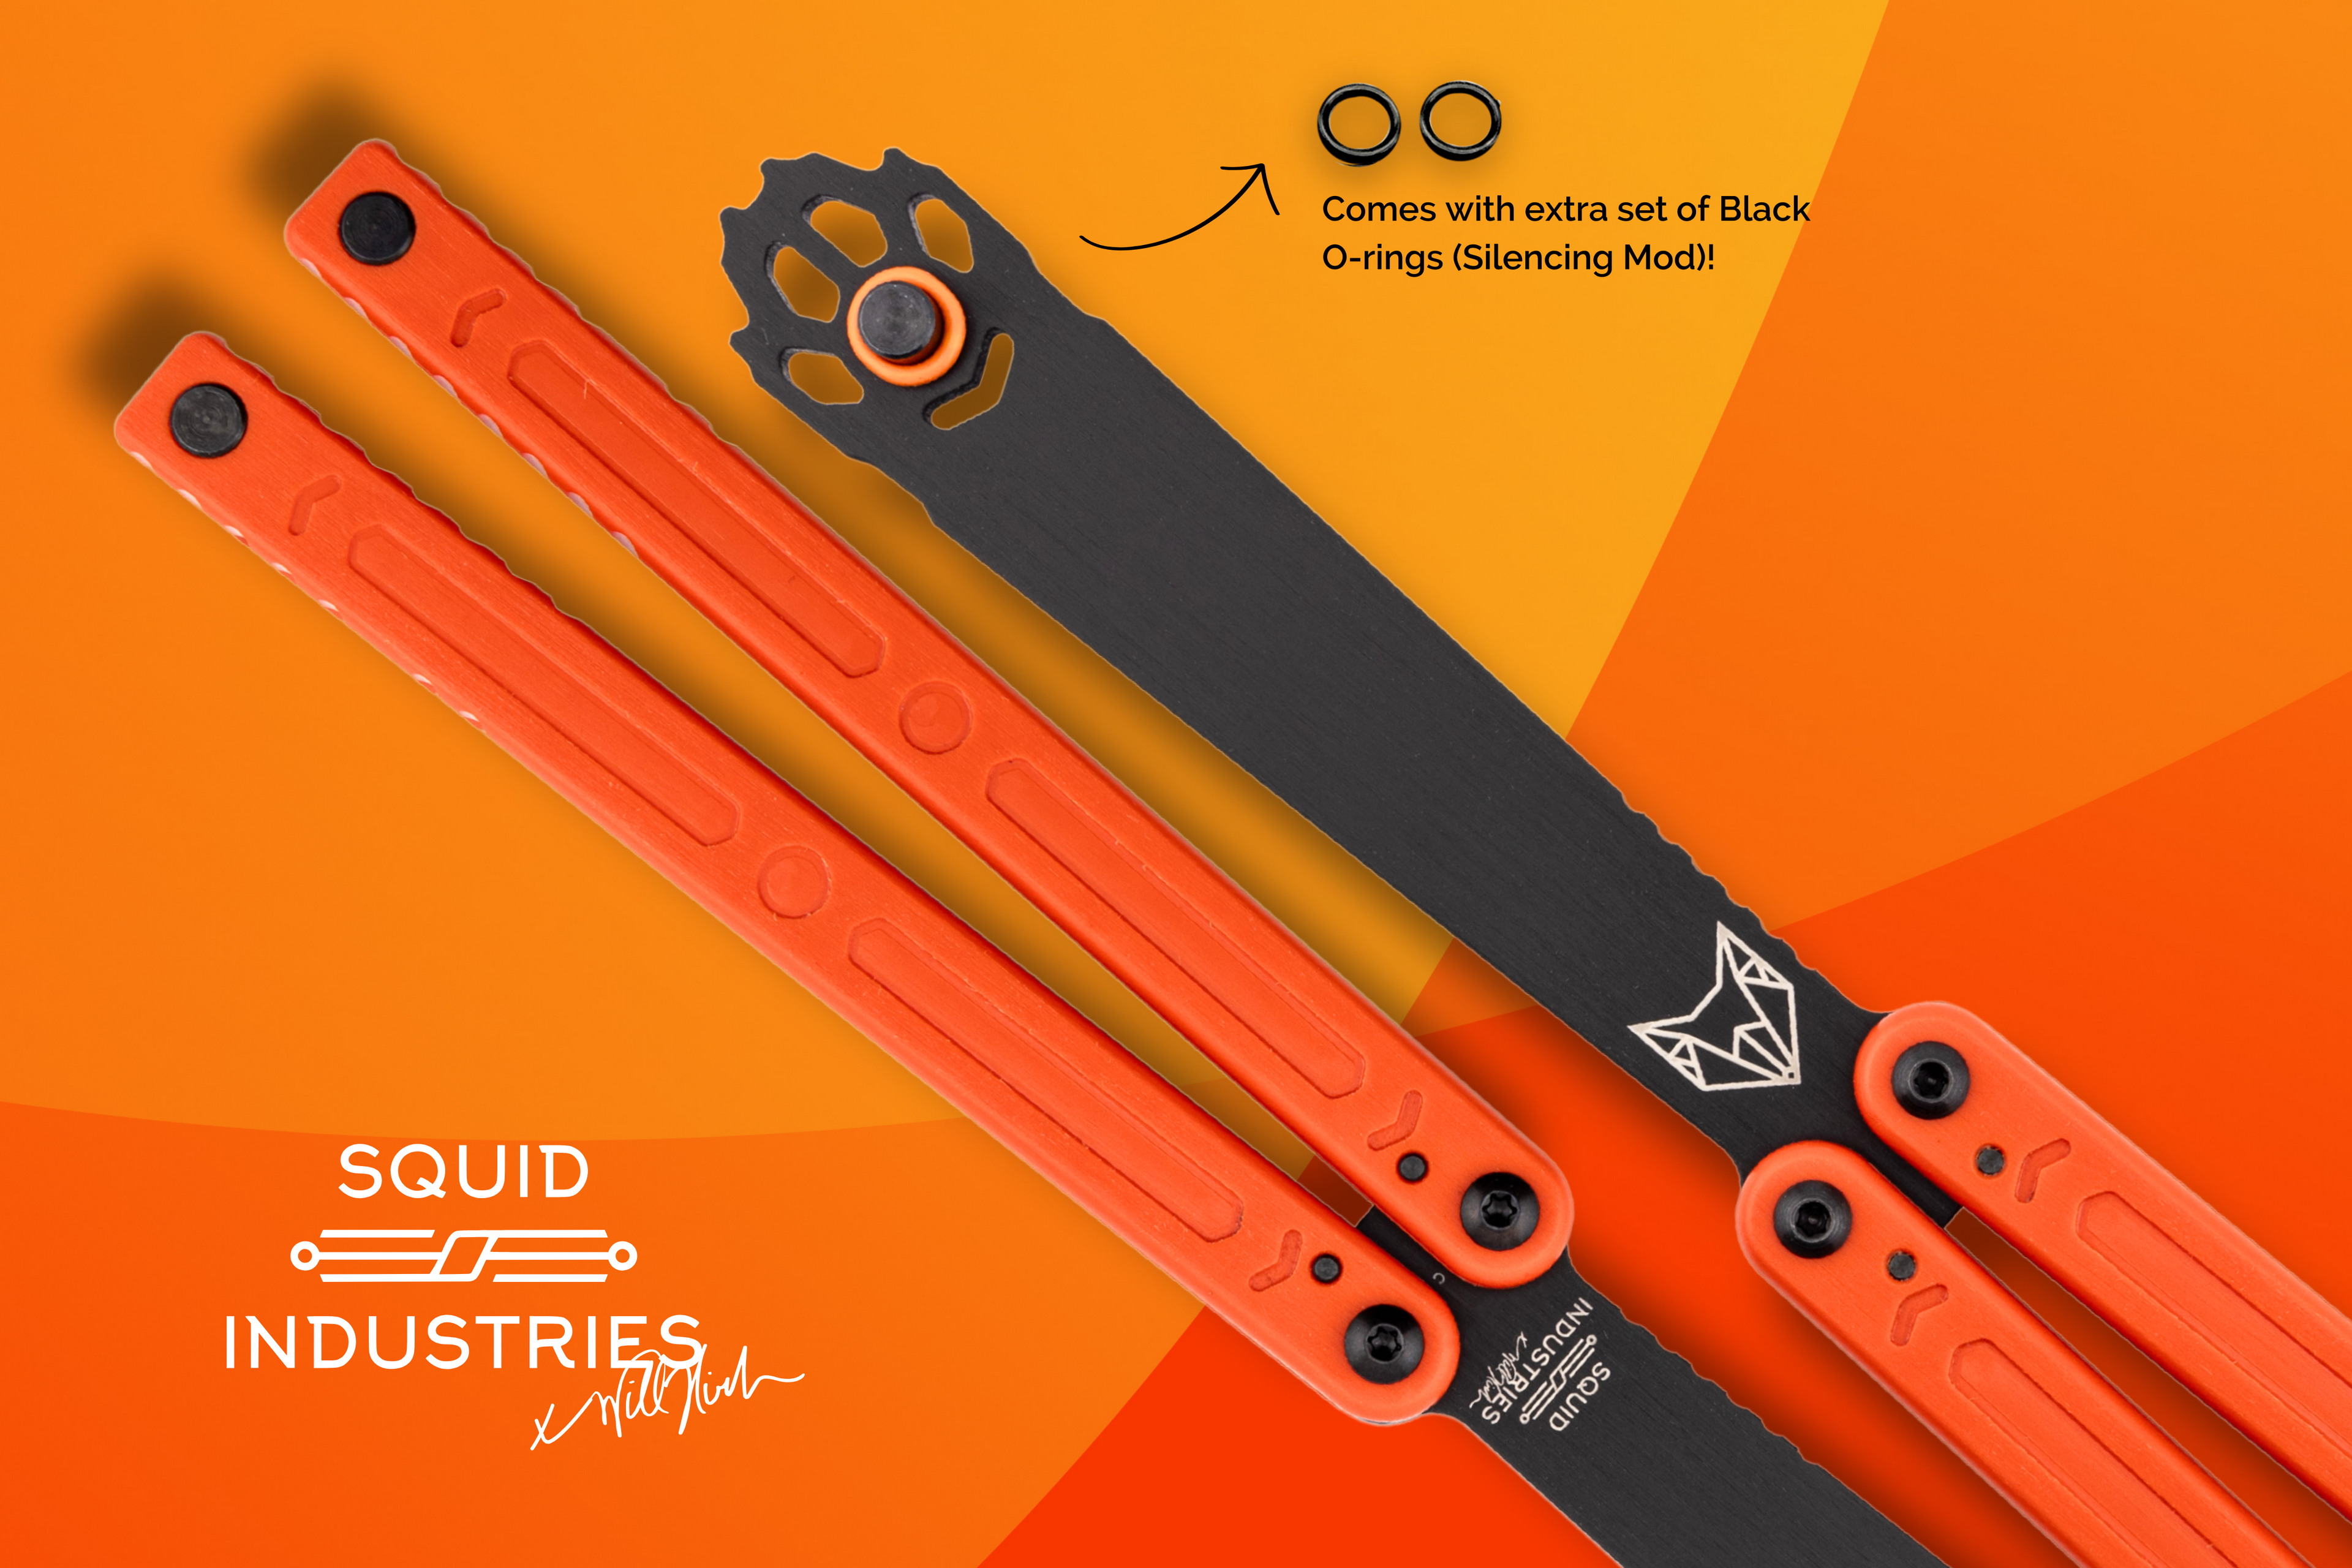 squiddy-wh production image showcasing fox logo and comes with extra set of black o-ring silencer mods